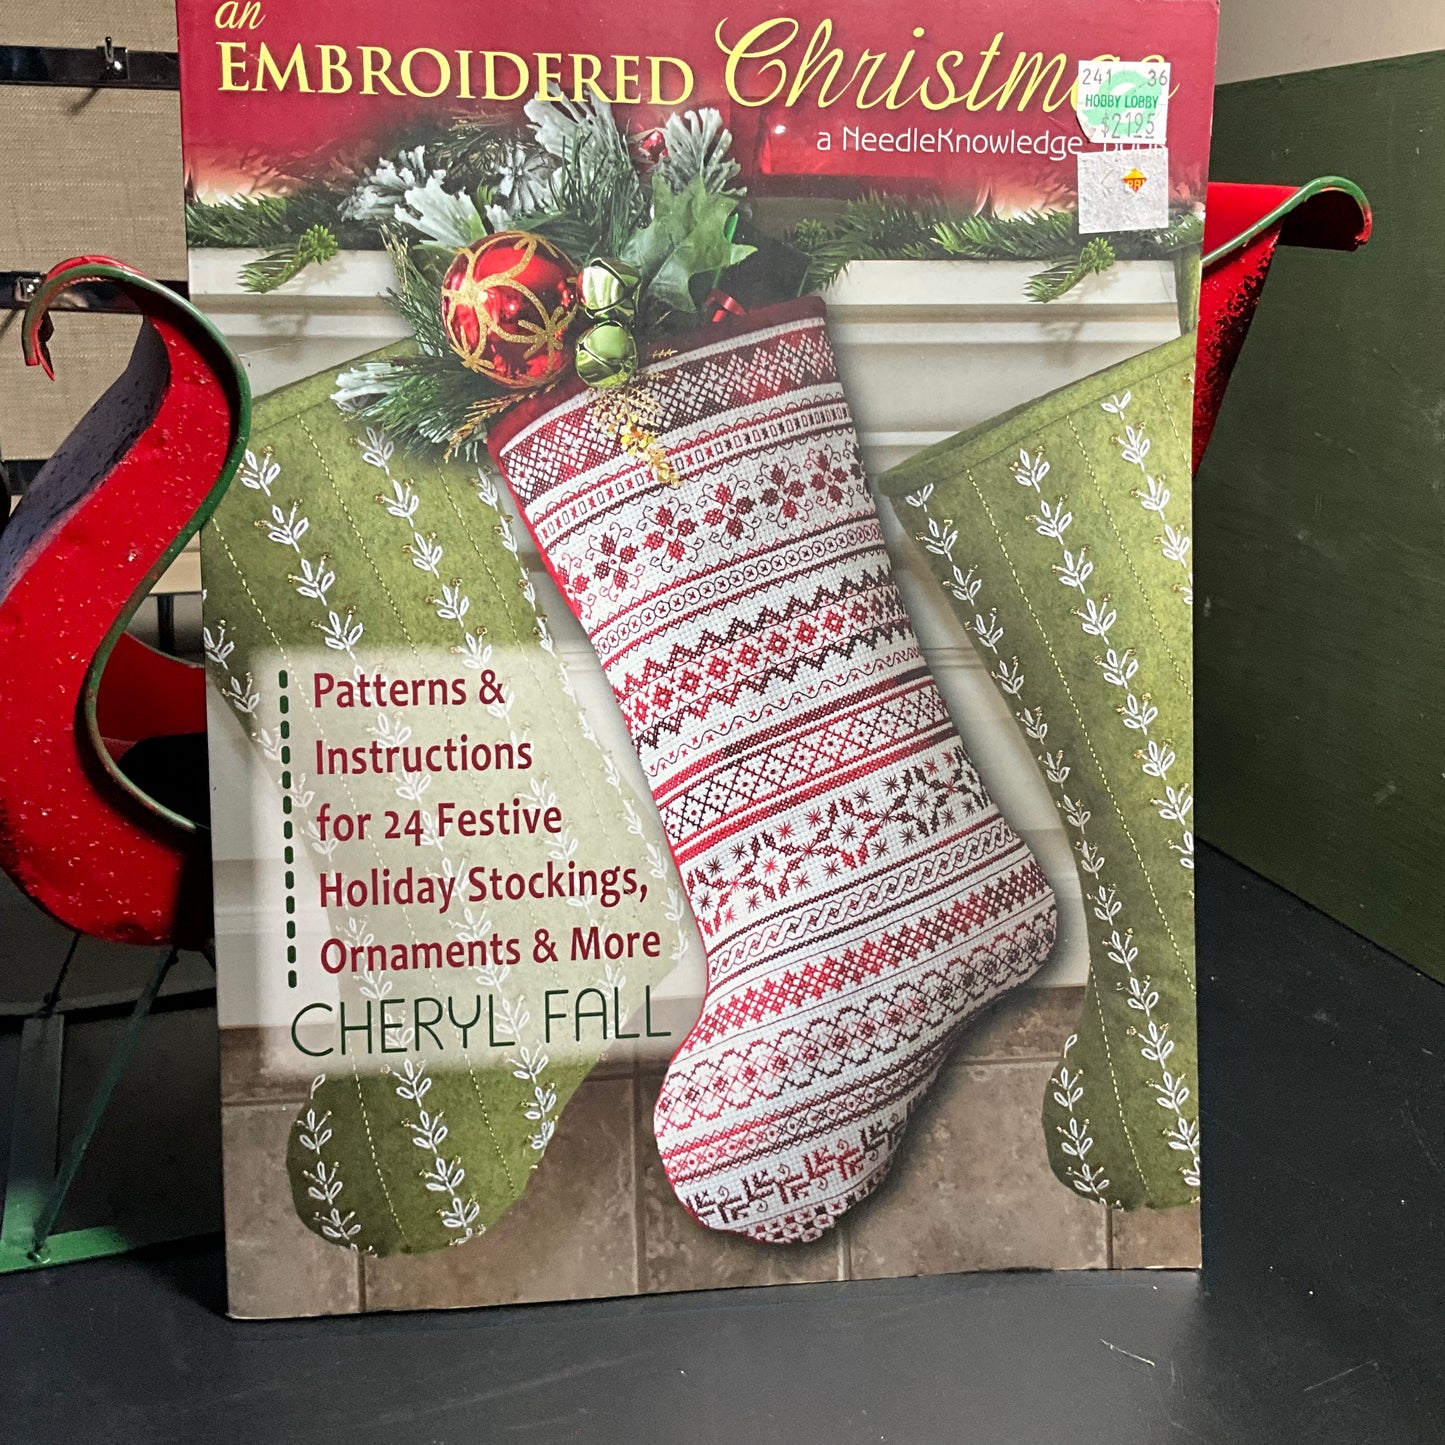 All Embroidered Christmas a Needle Knowledge needlecraft book